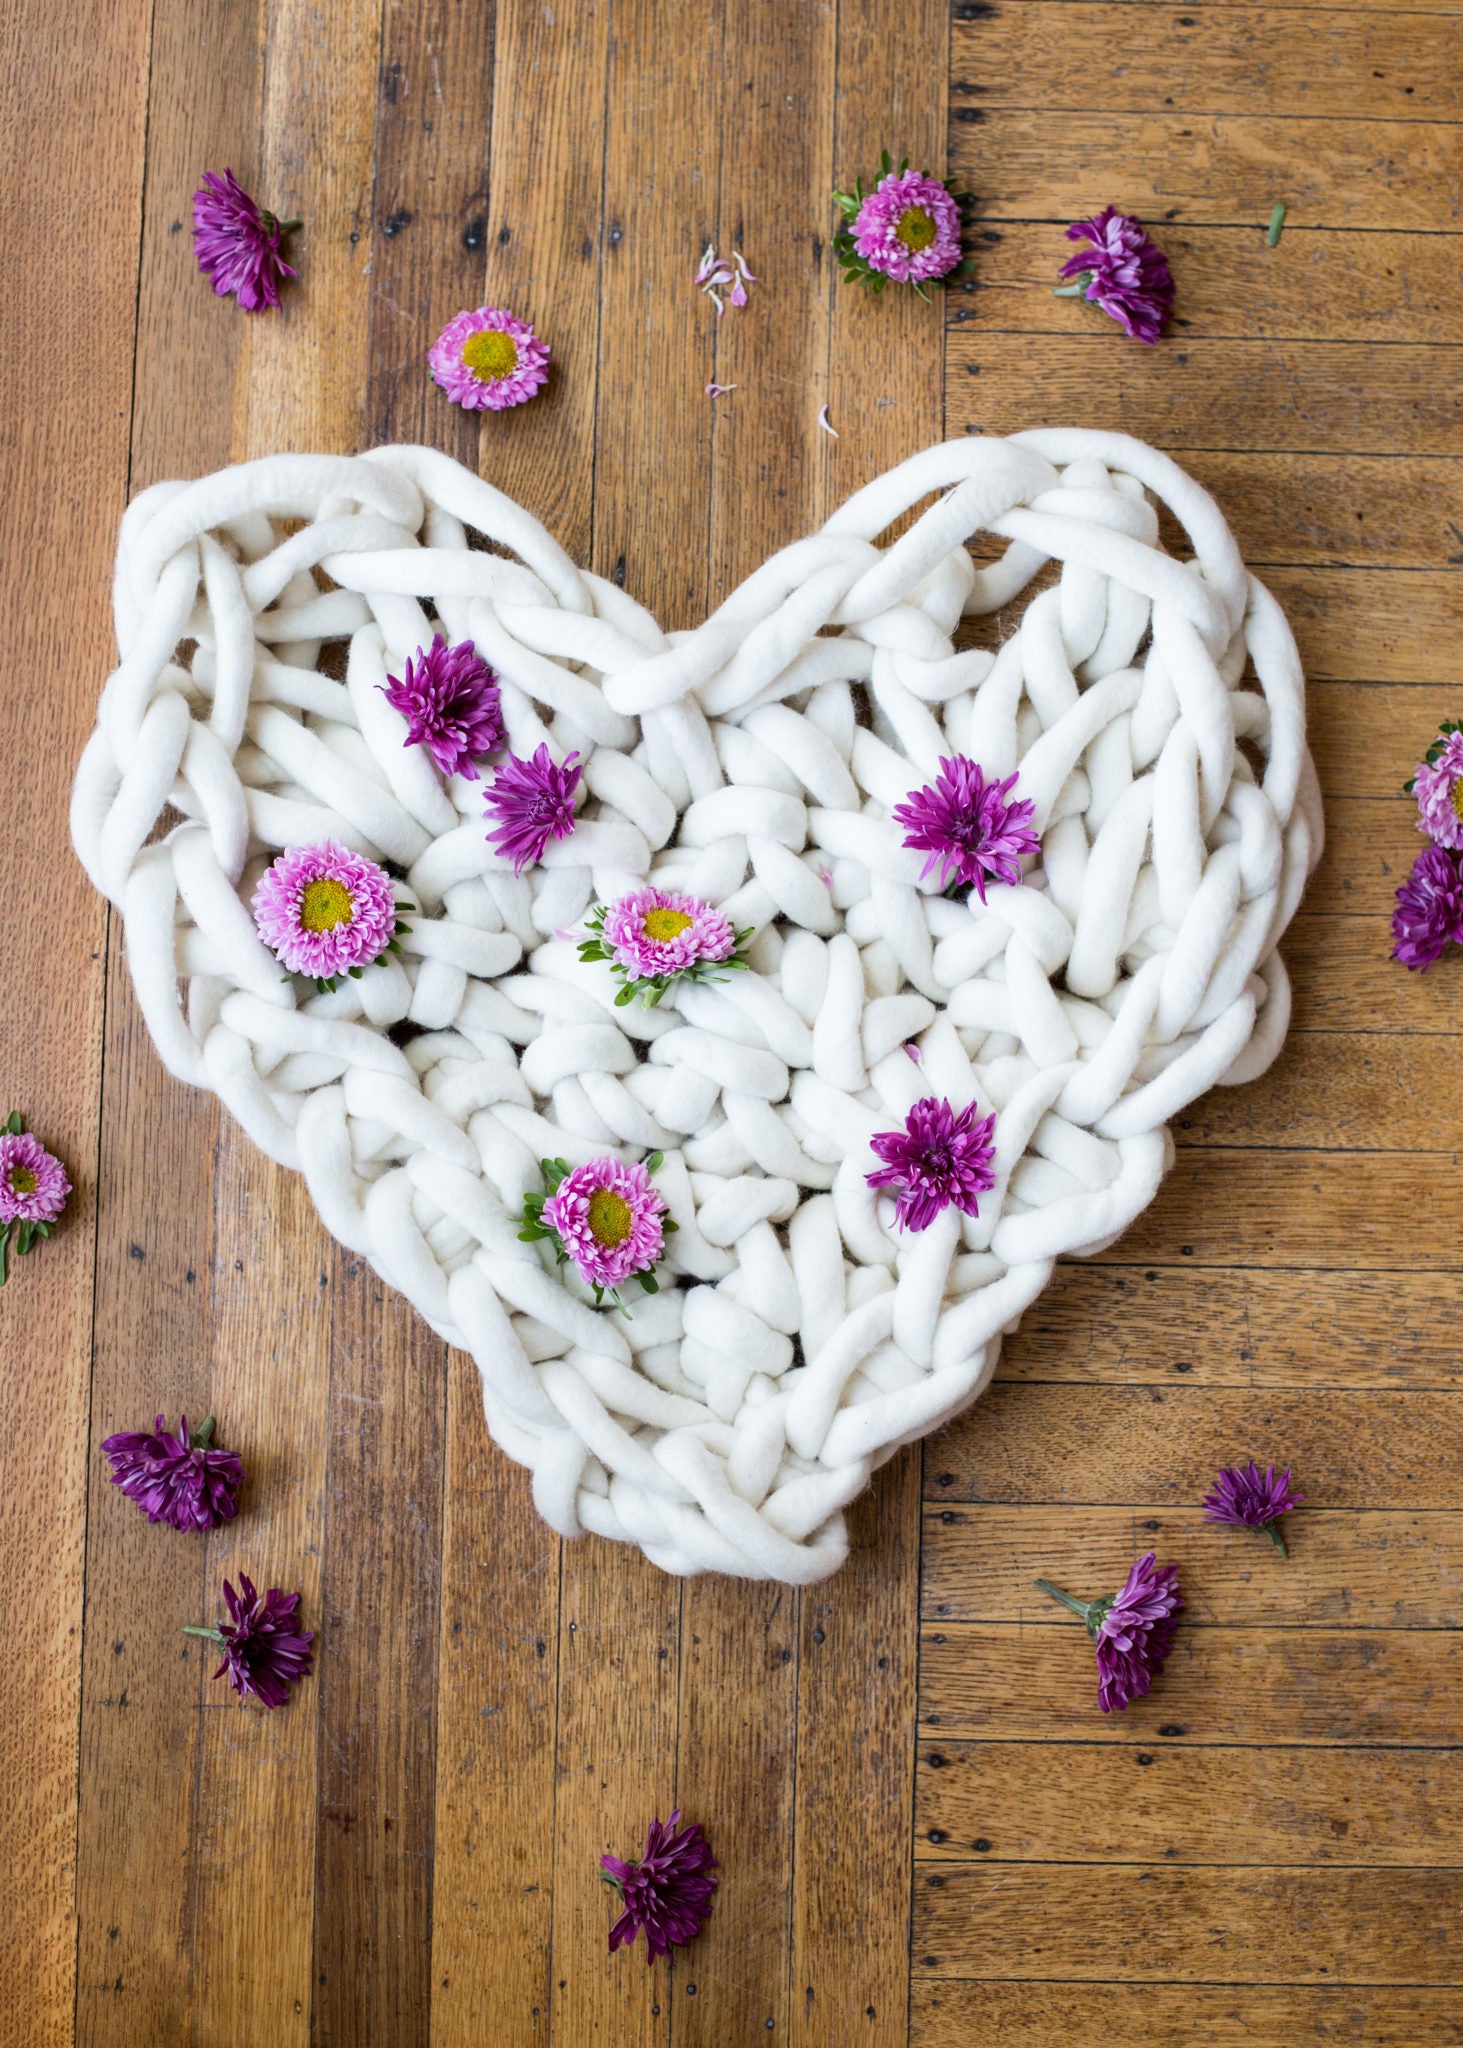 A GIANT Hand Crochet Heart to Spread Valentine's Love